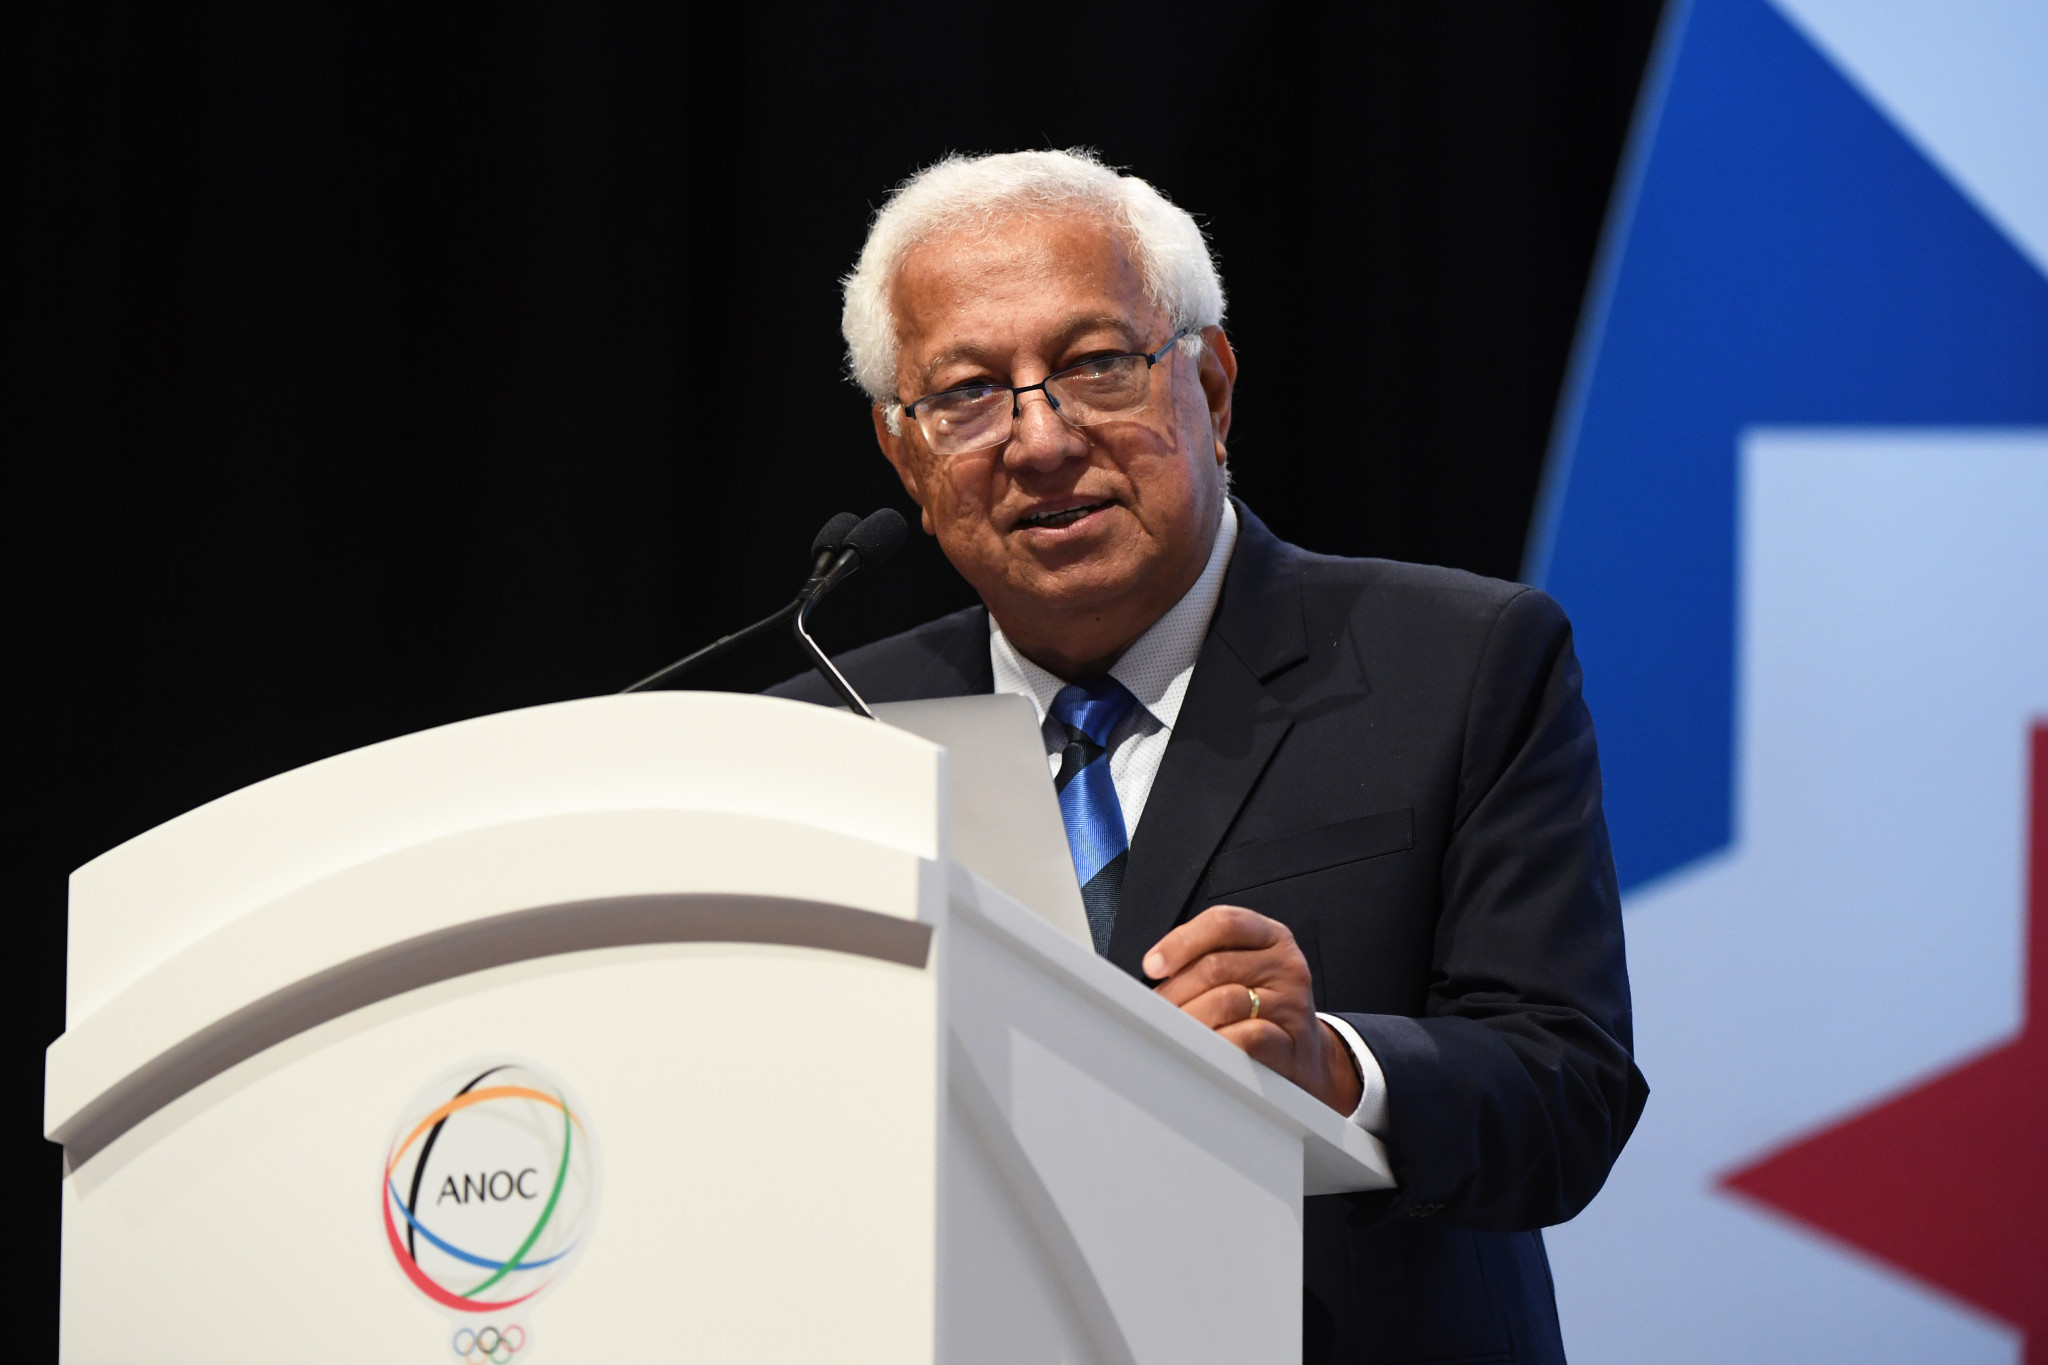 Acting ANOC President Robin Mitchell said there was faith in the IOC and Tokyo 2020 to deliver a safe, secure and sustainable Olympic Games ©Getty Images